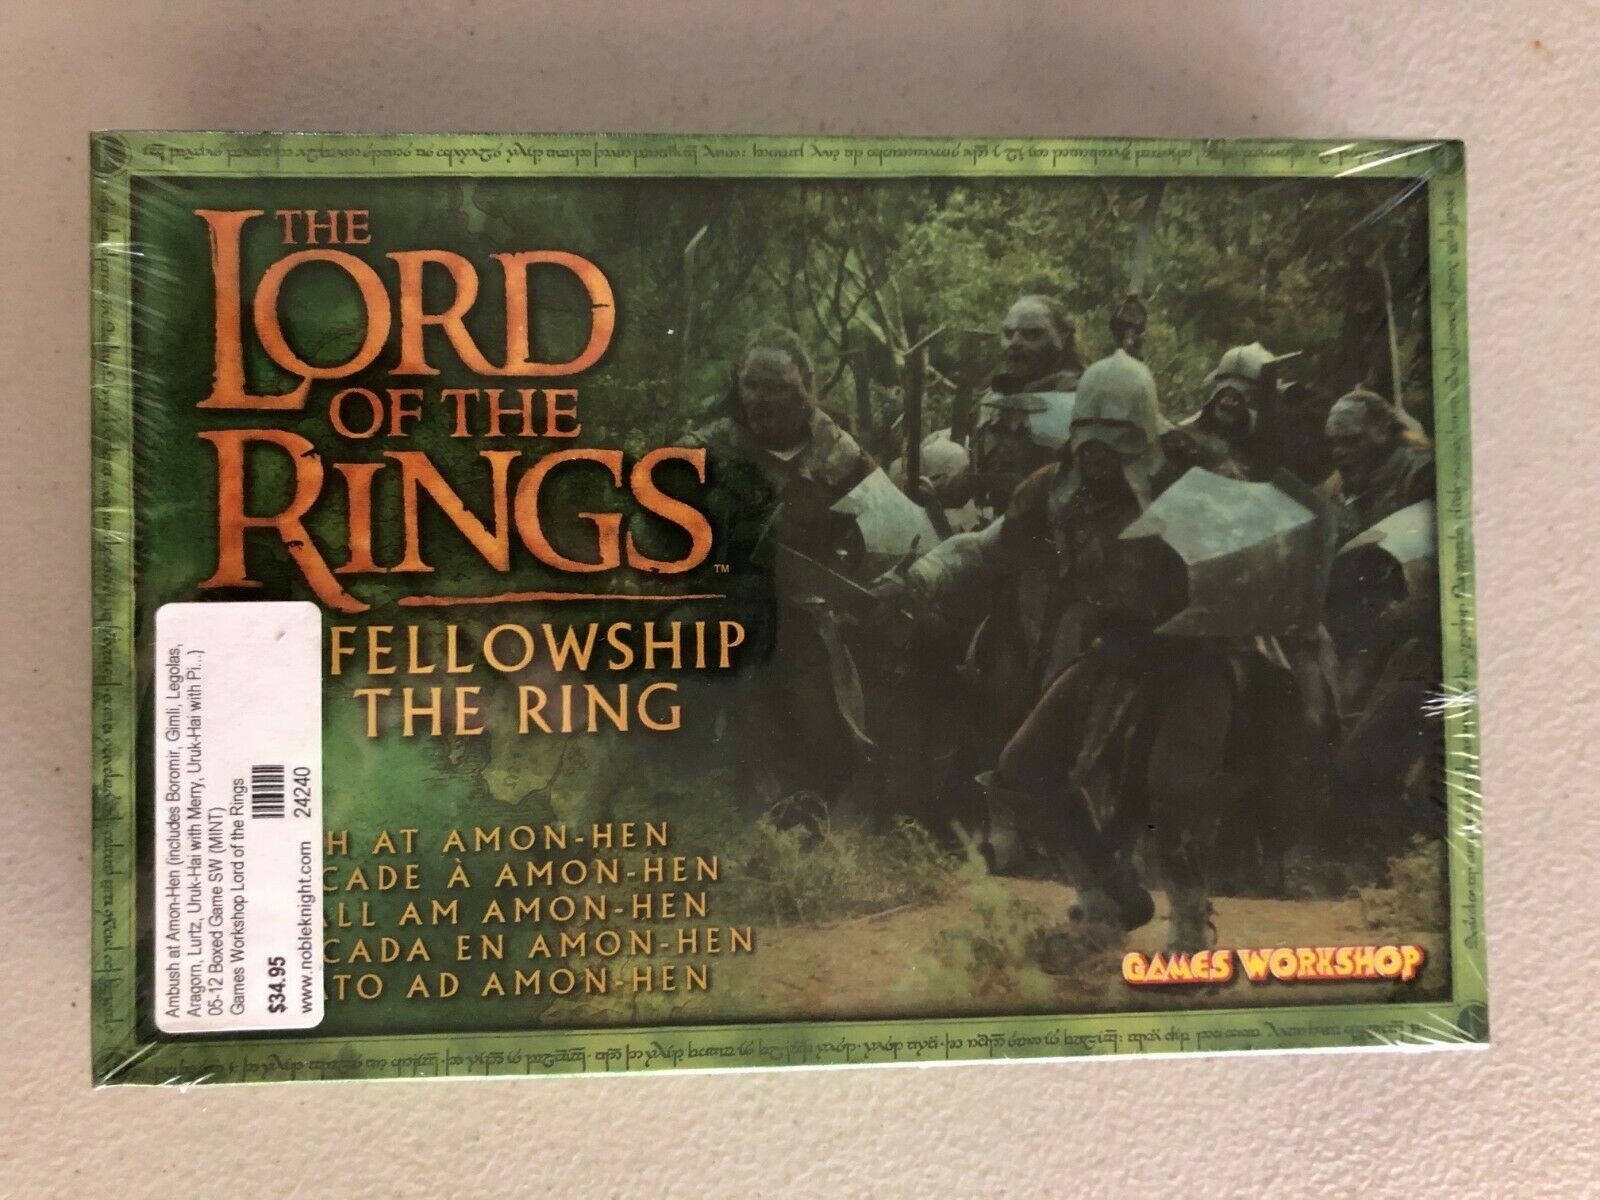 Games Workshop Miniatures Lord Of The Rings Ambush At Amon-hen Gaw05-12 - New